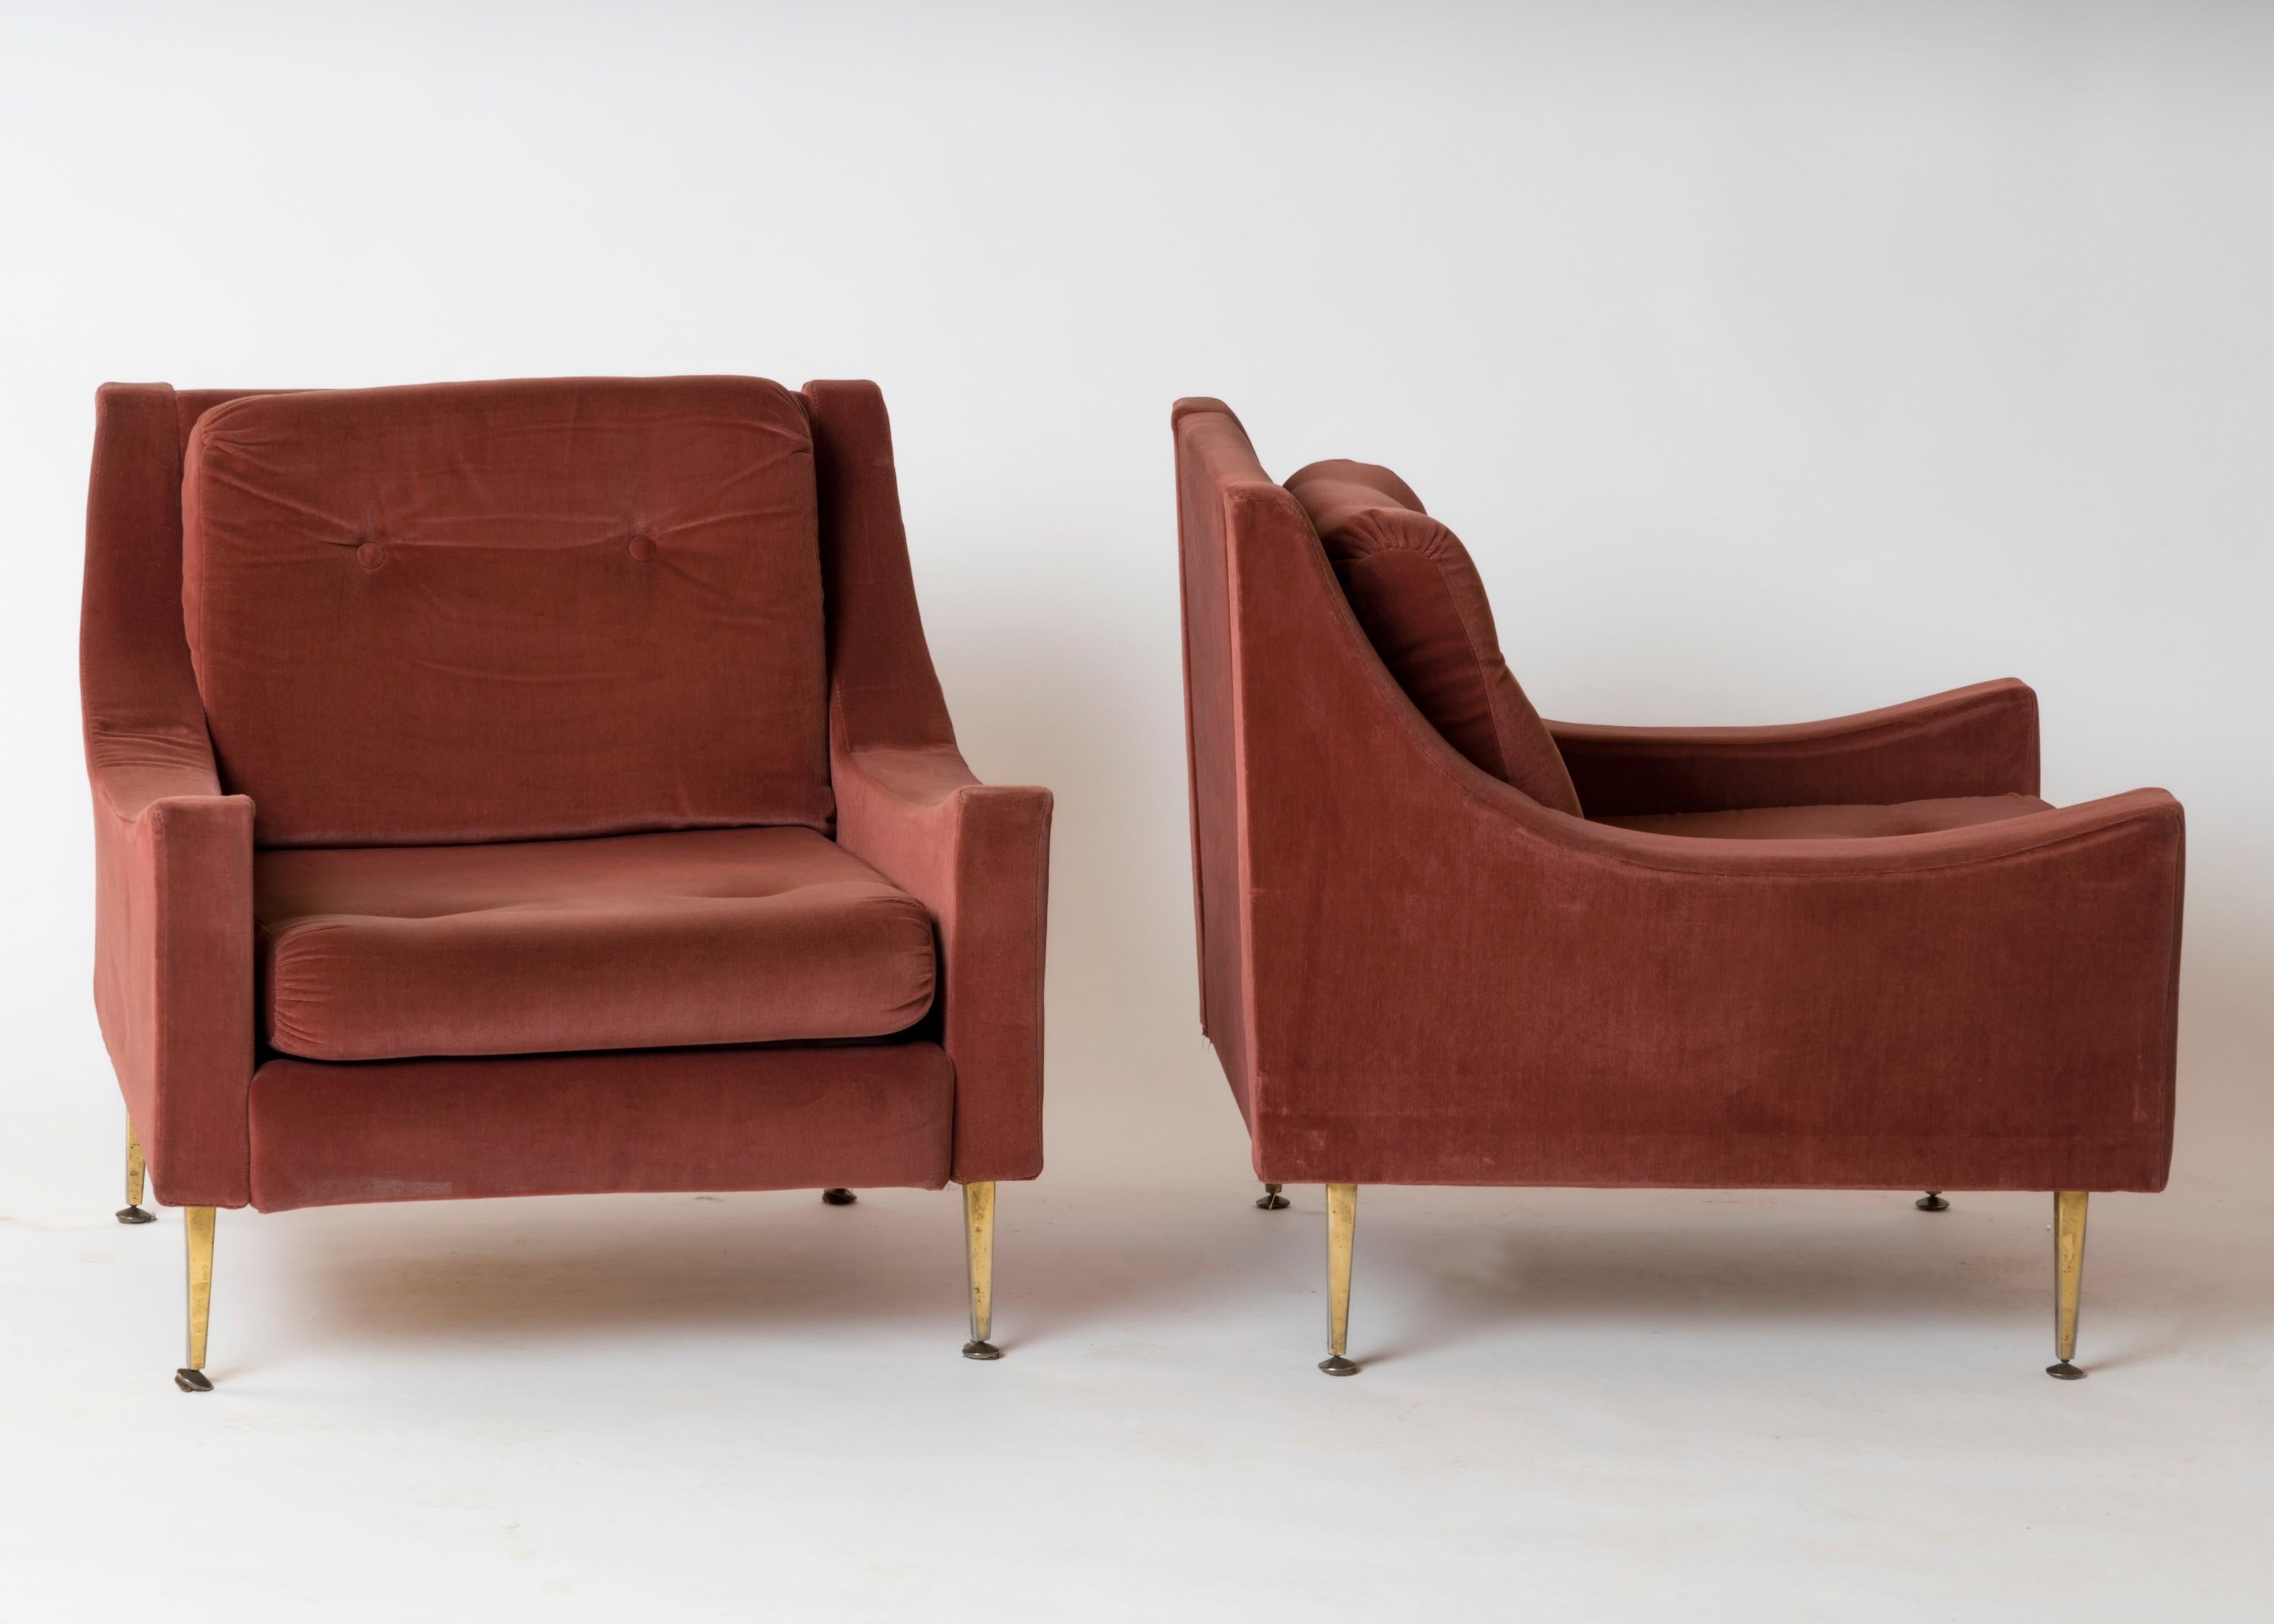 Rarest pair of elegant armchairs by Souplina France. 1970s. Currently in original condition with velvet upholstery. COM recommended. 
Price of re-upholstering not included. In fair vintage condition.
Souplina is the maker of the Giorio Montani